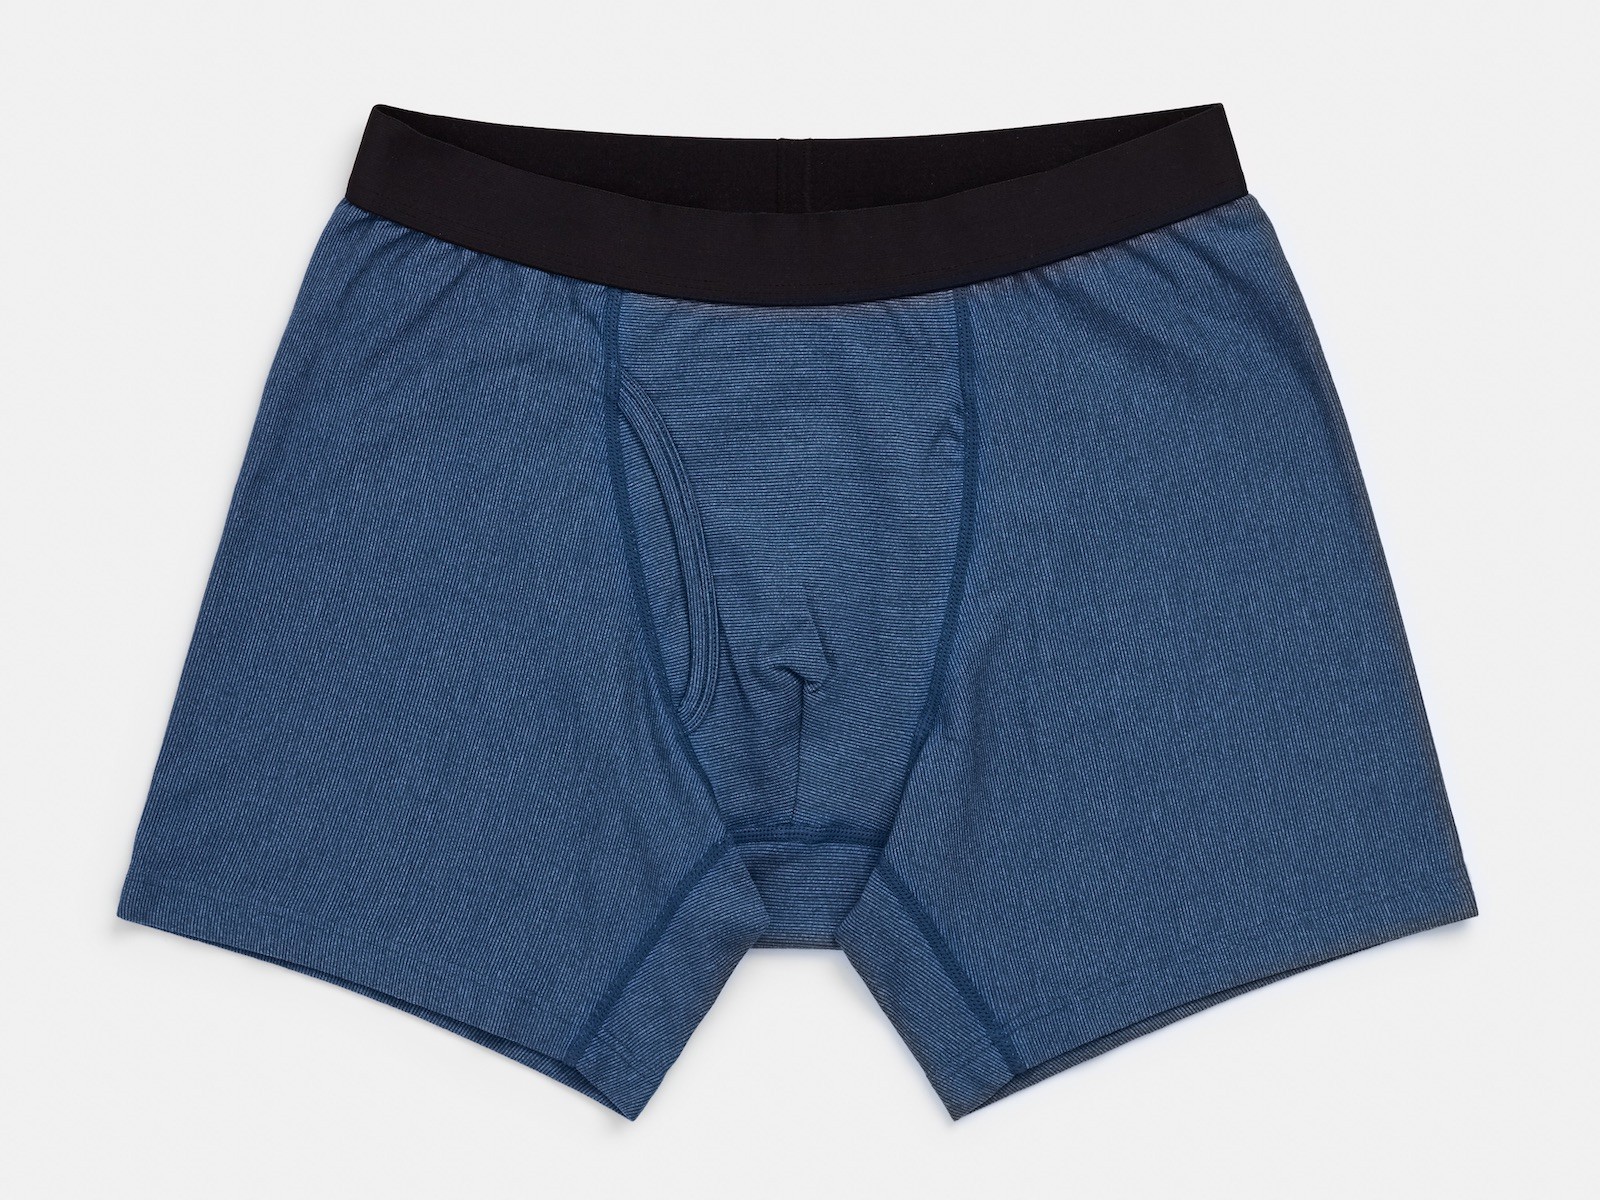 https://snarkynomad.com/wp-content/uploads/2019/01/Wool-and-Prince-boxer-brief-2point0-promo-photo-front.jpg